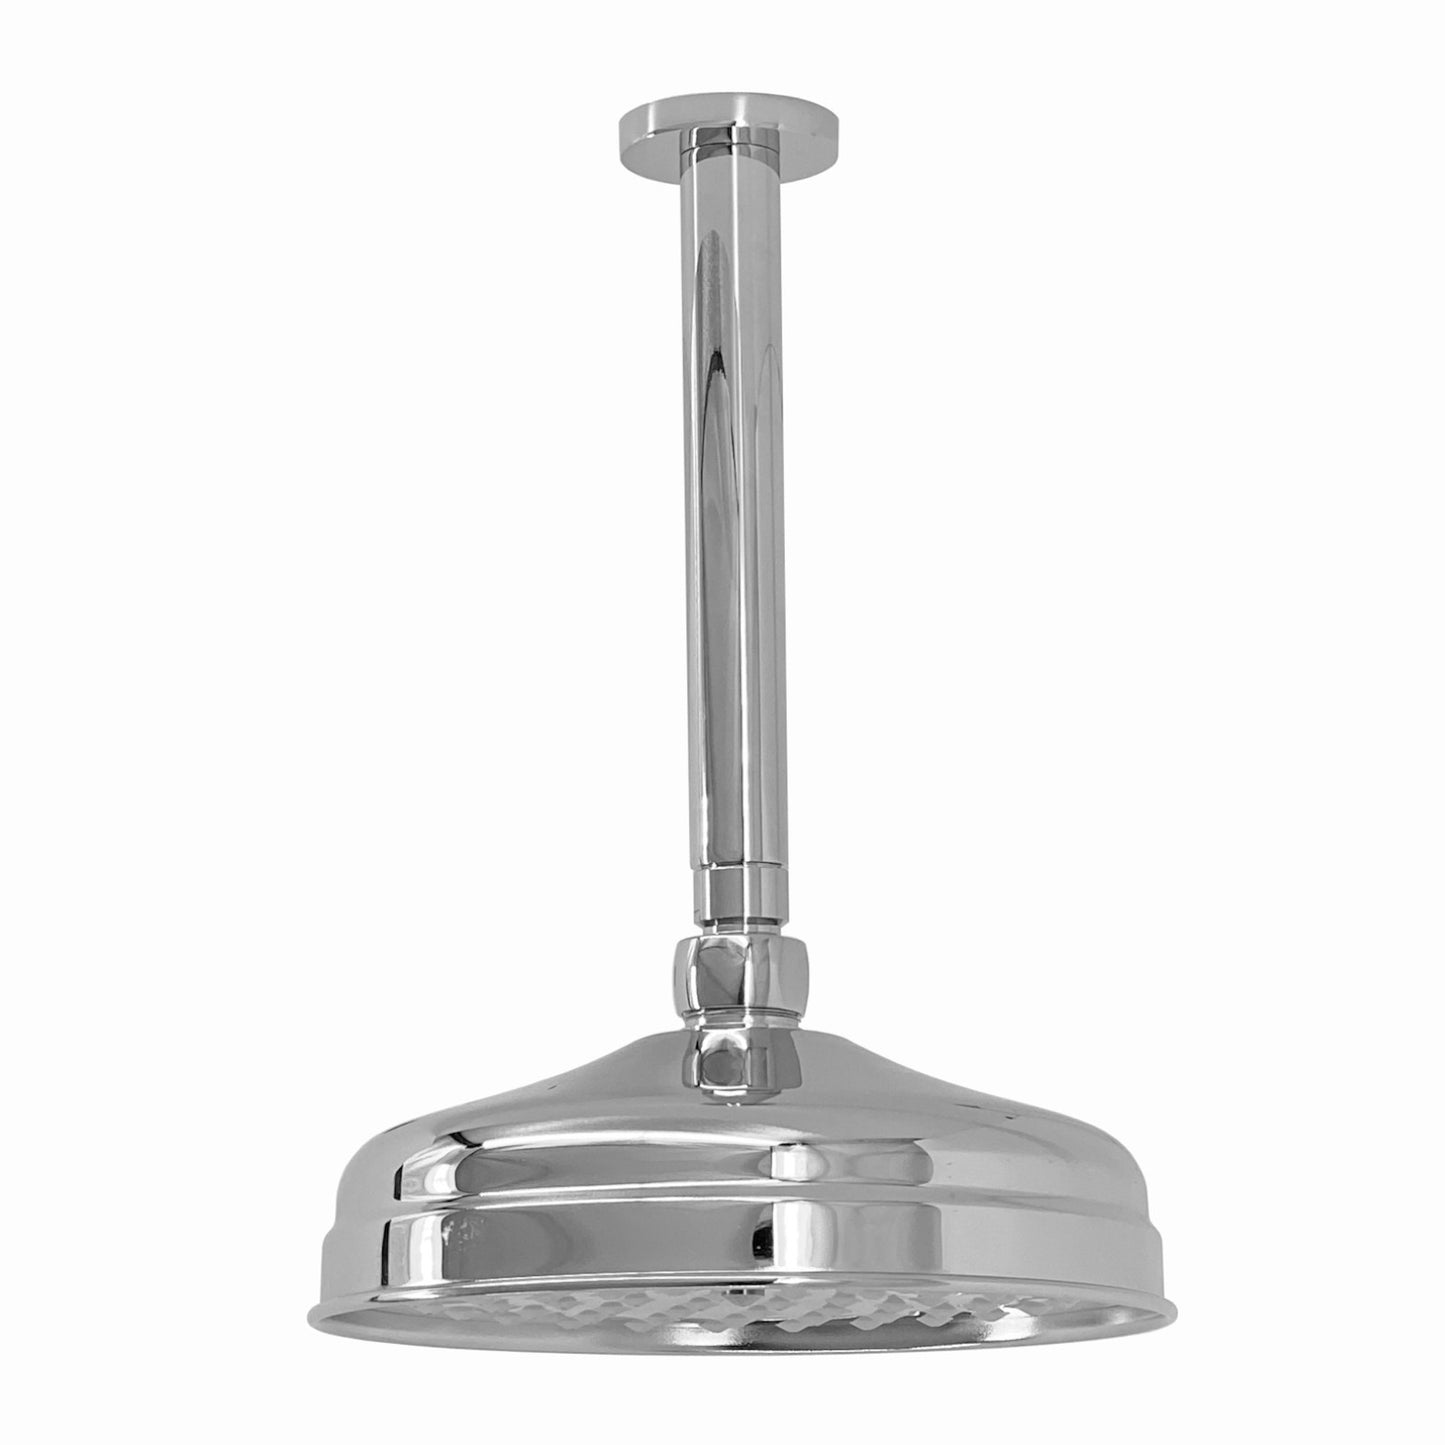 Traditional Ceiling Fixed Apron Brass Shower Head 8" With 180mm Ceiling Shower Arm - Chrome